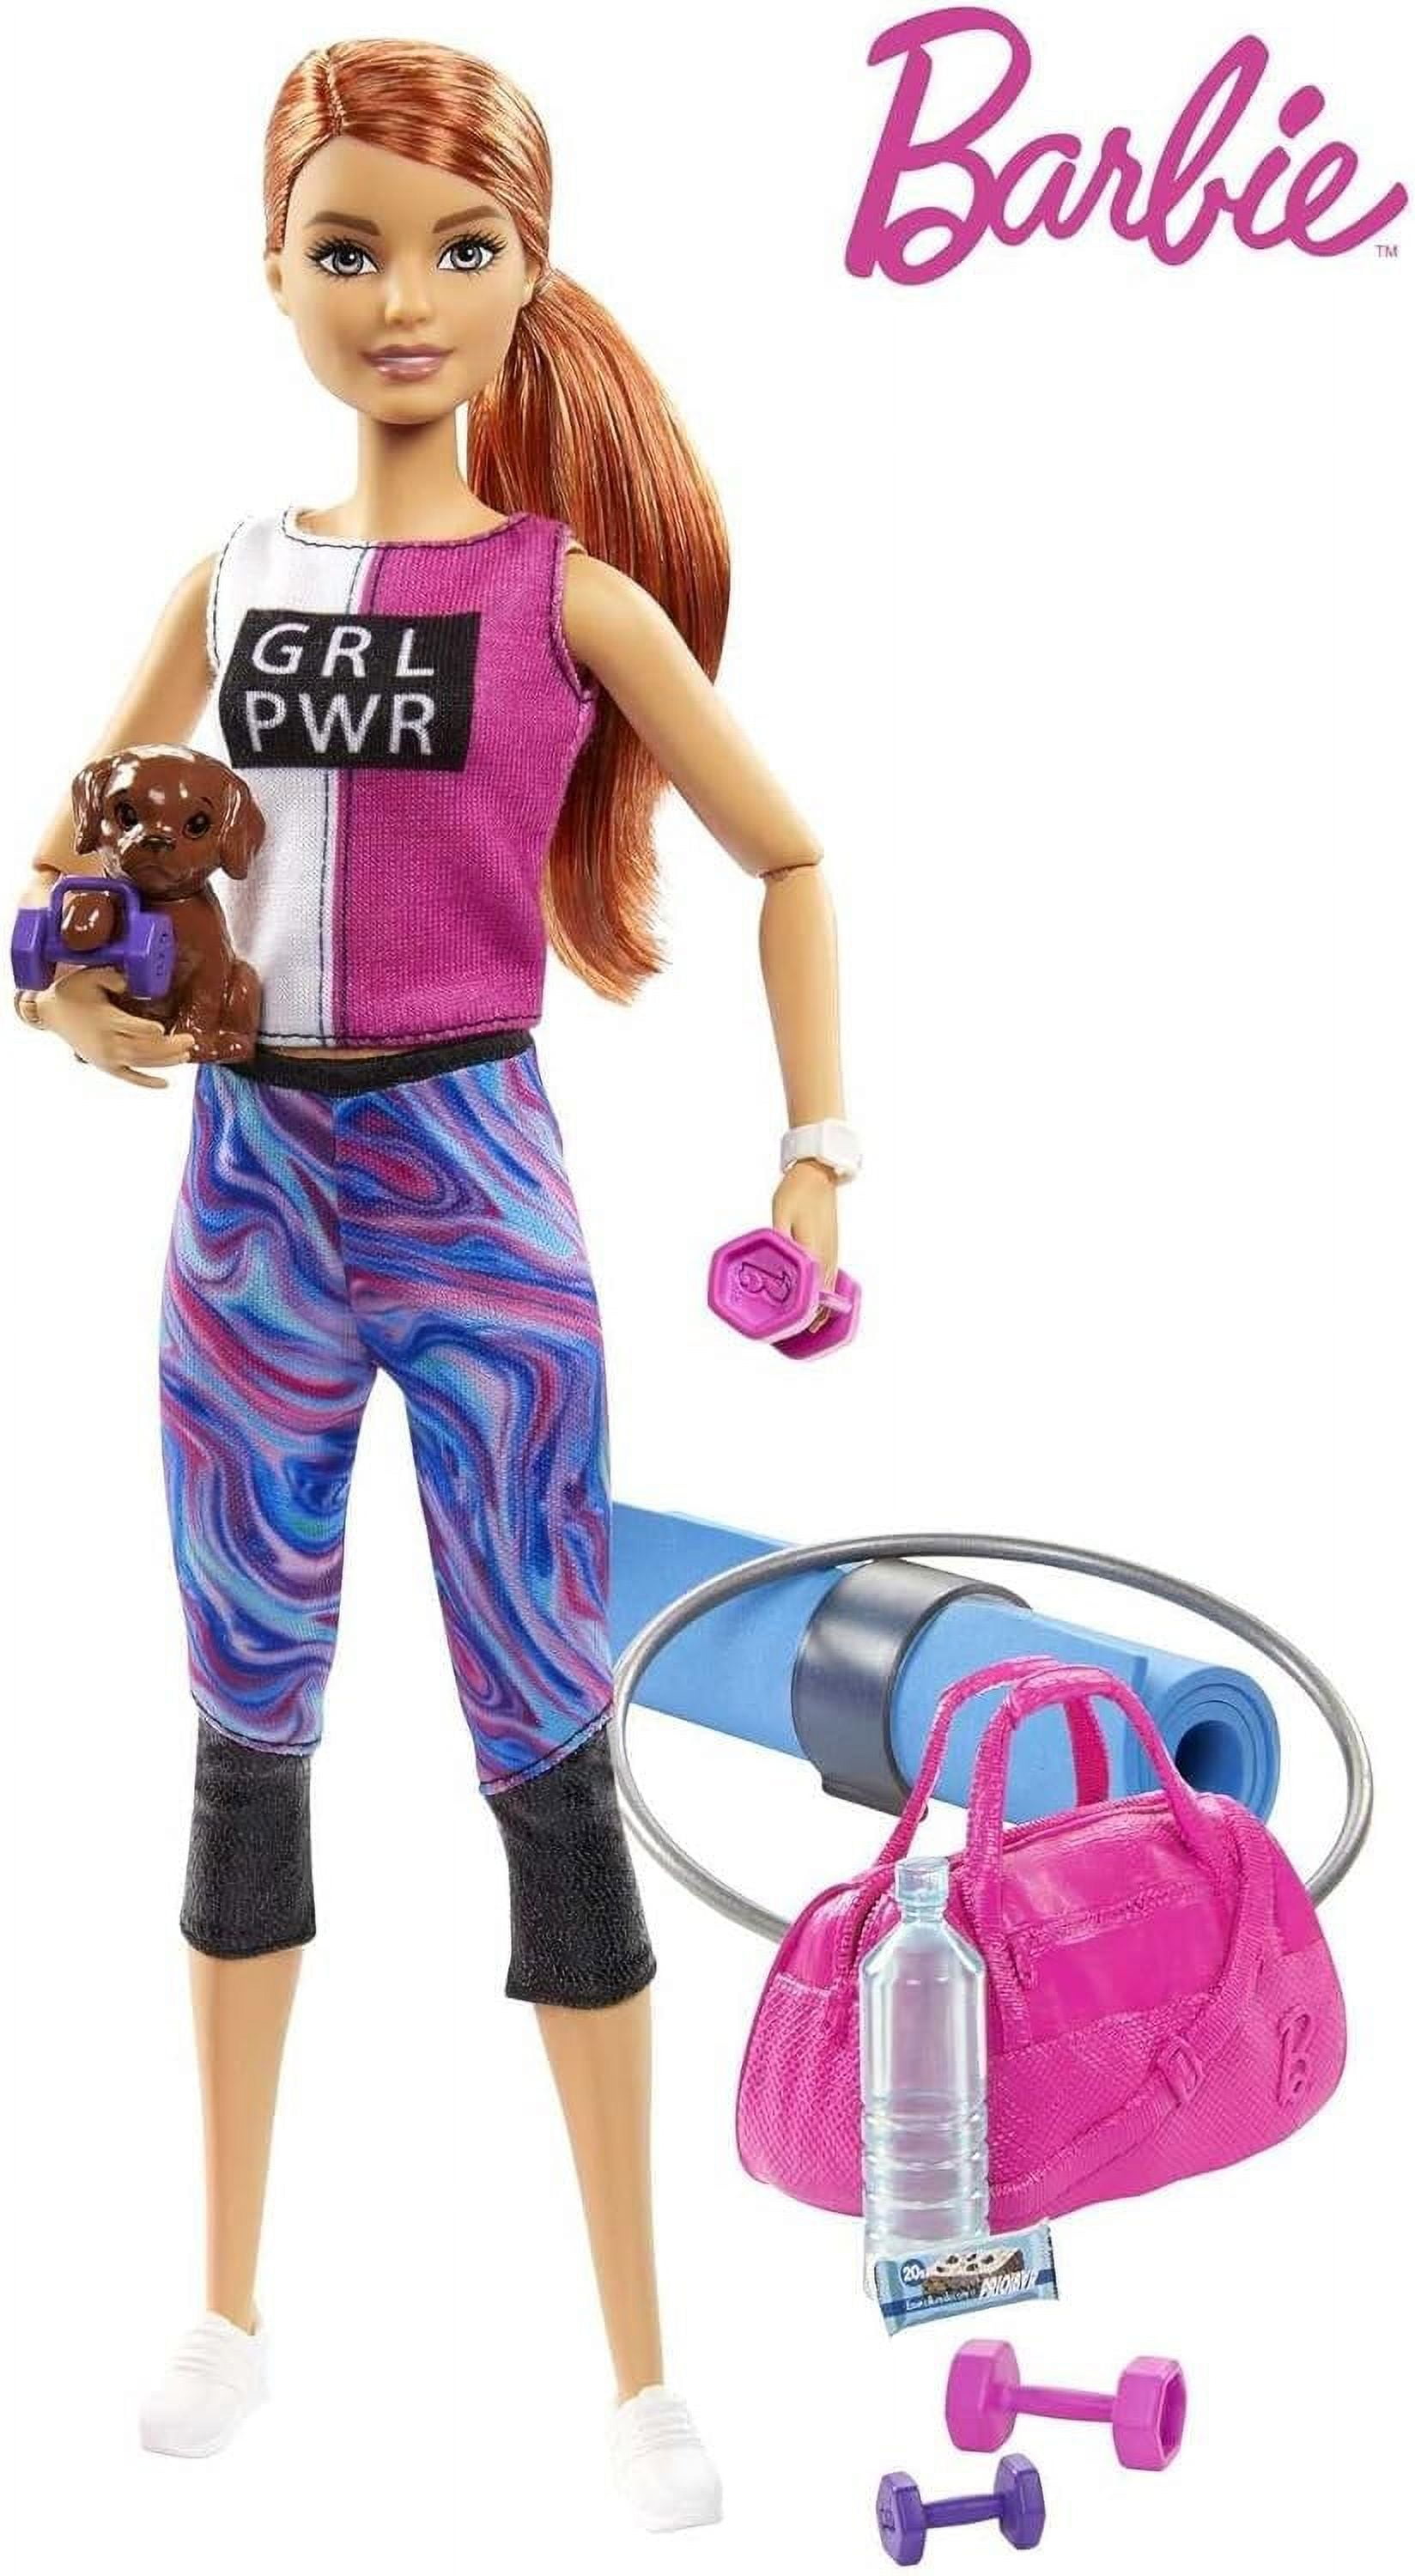 Barbie Puppy Loves Fitness with Red Haired Yoga Barbie Set, 3 Piece - Macy's